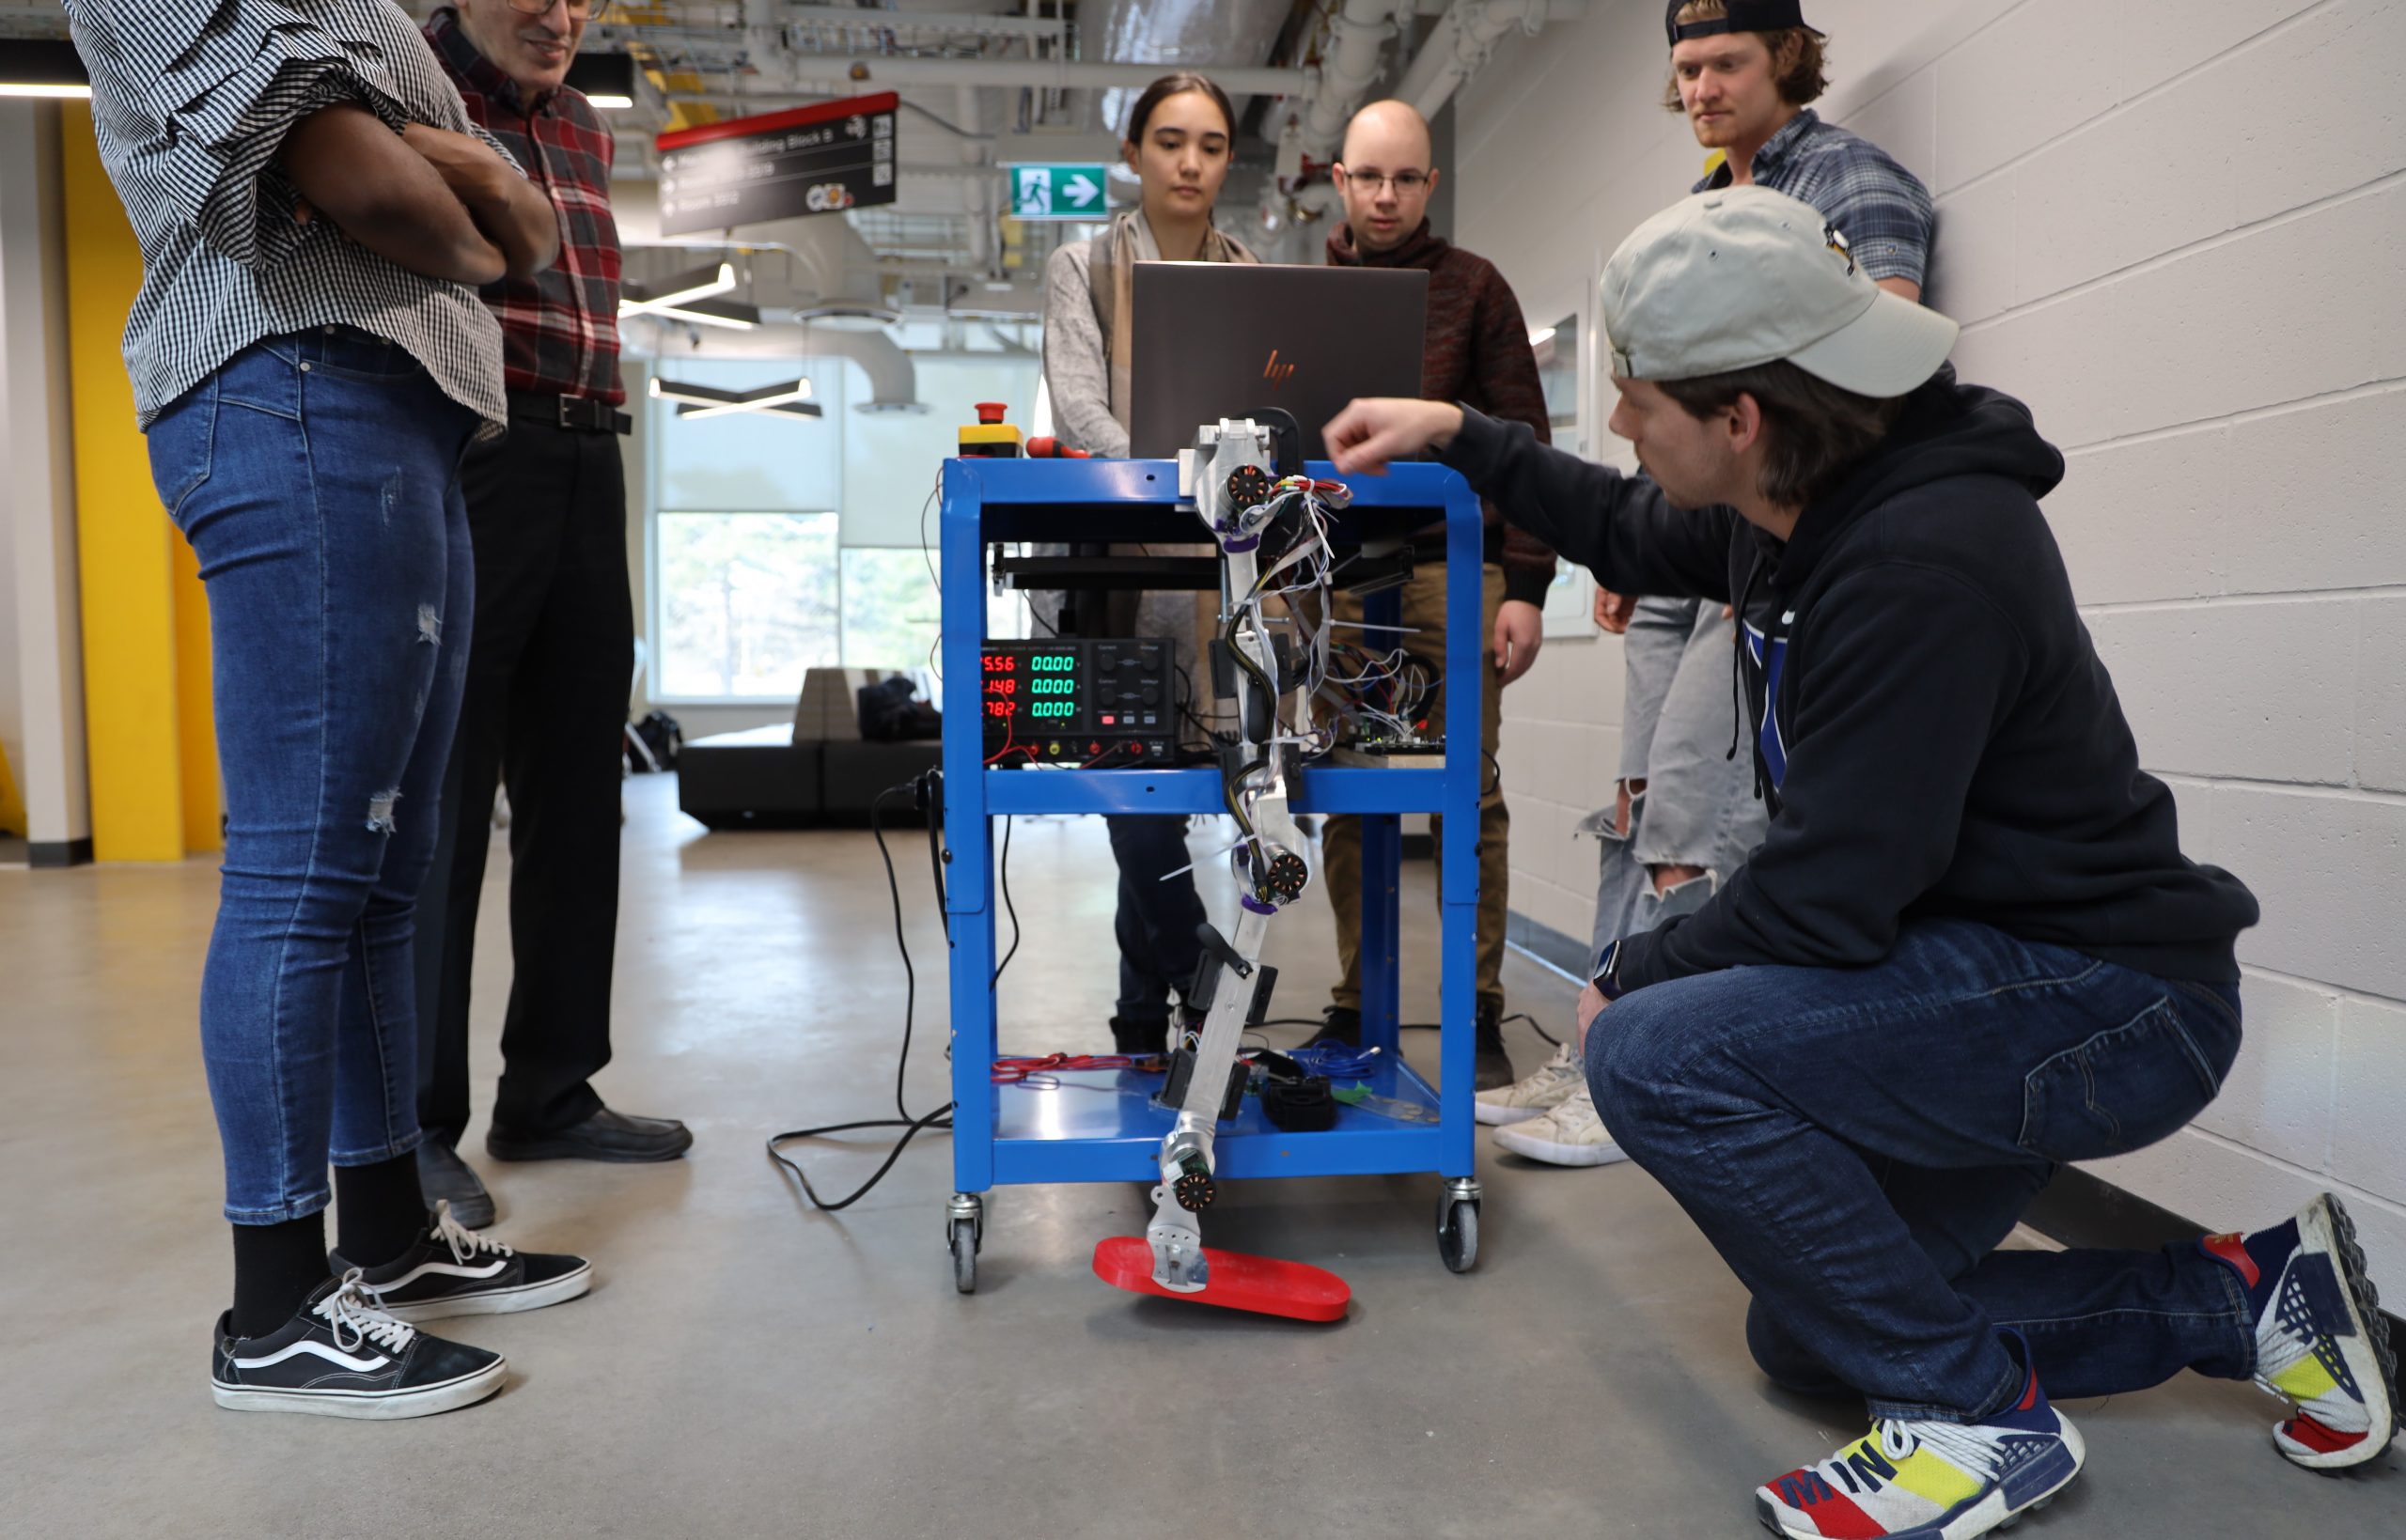 A group of people surround a robot leg they are looking at